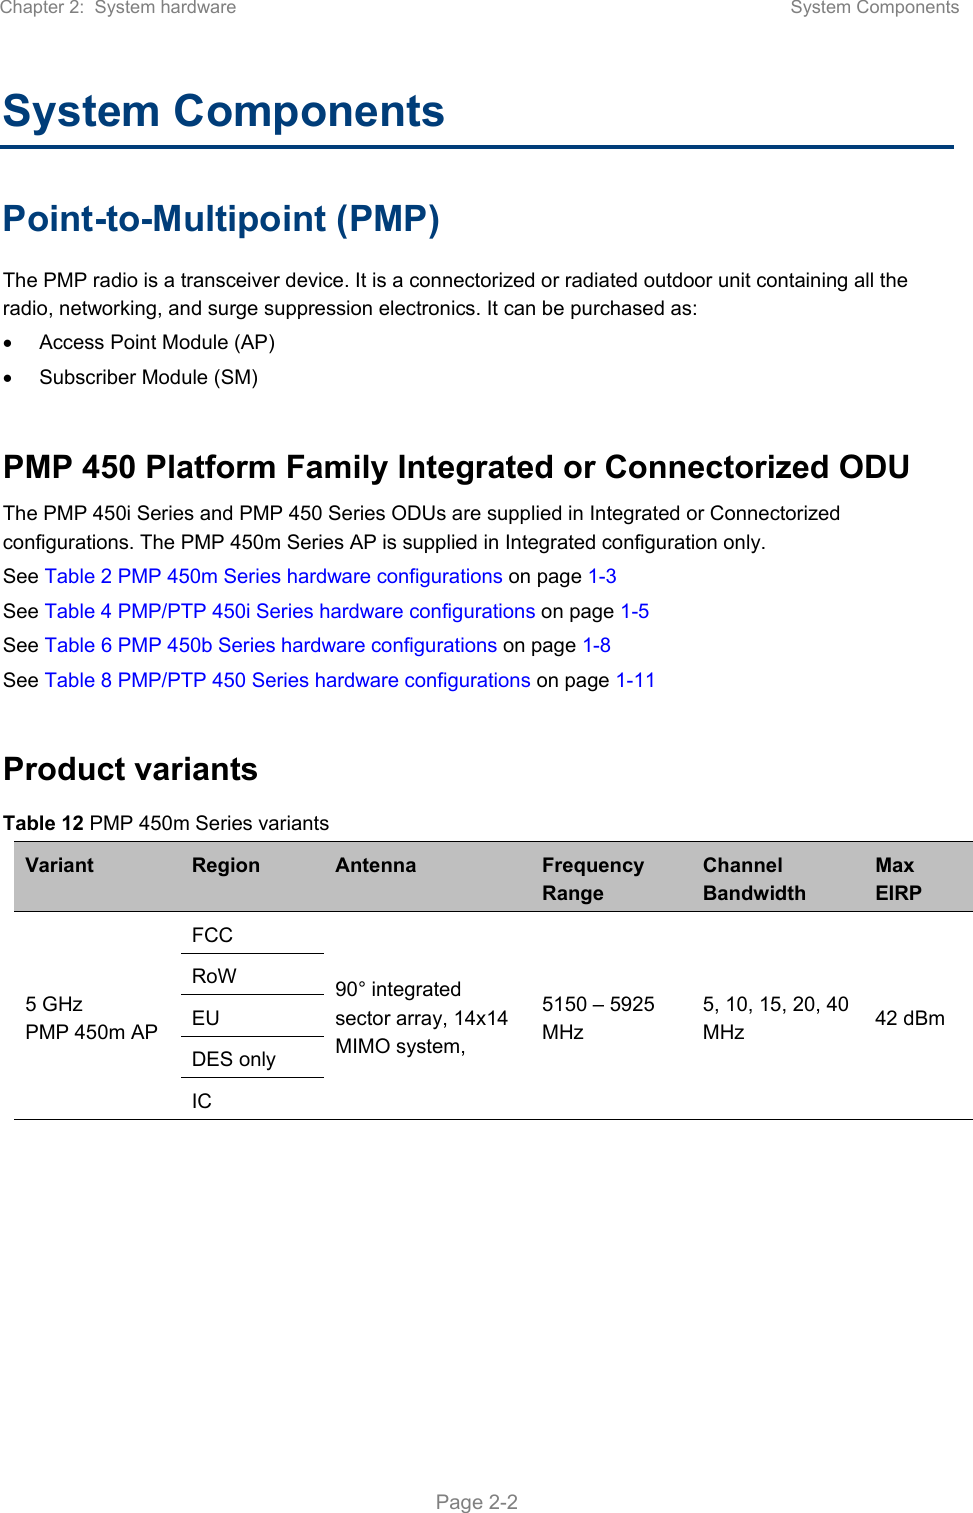 Page 66 of Cambium Networks 50450M 5GHz Point to MultiPoint Multi User MIMO Access Point User Manual PART1